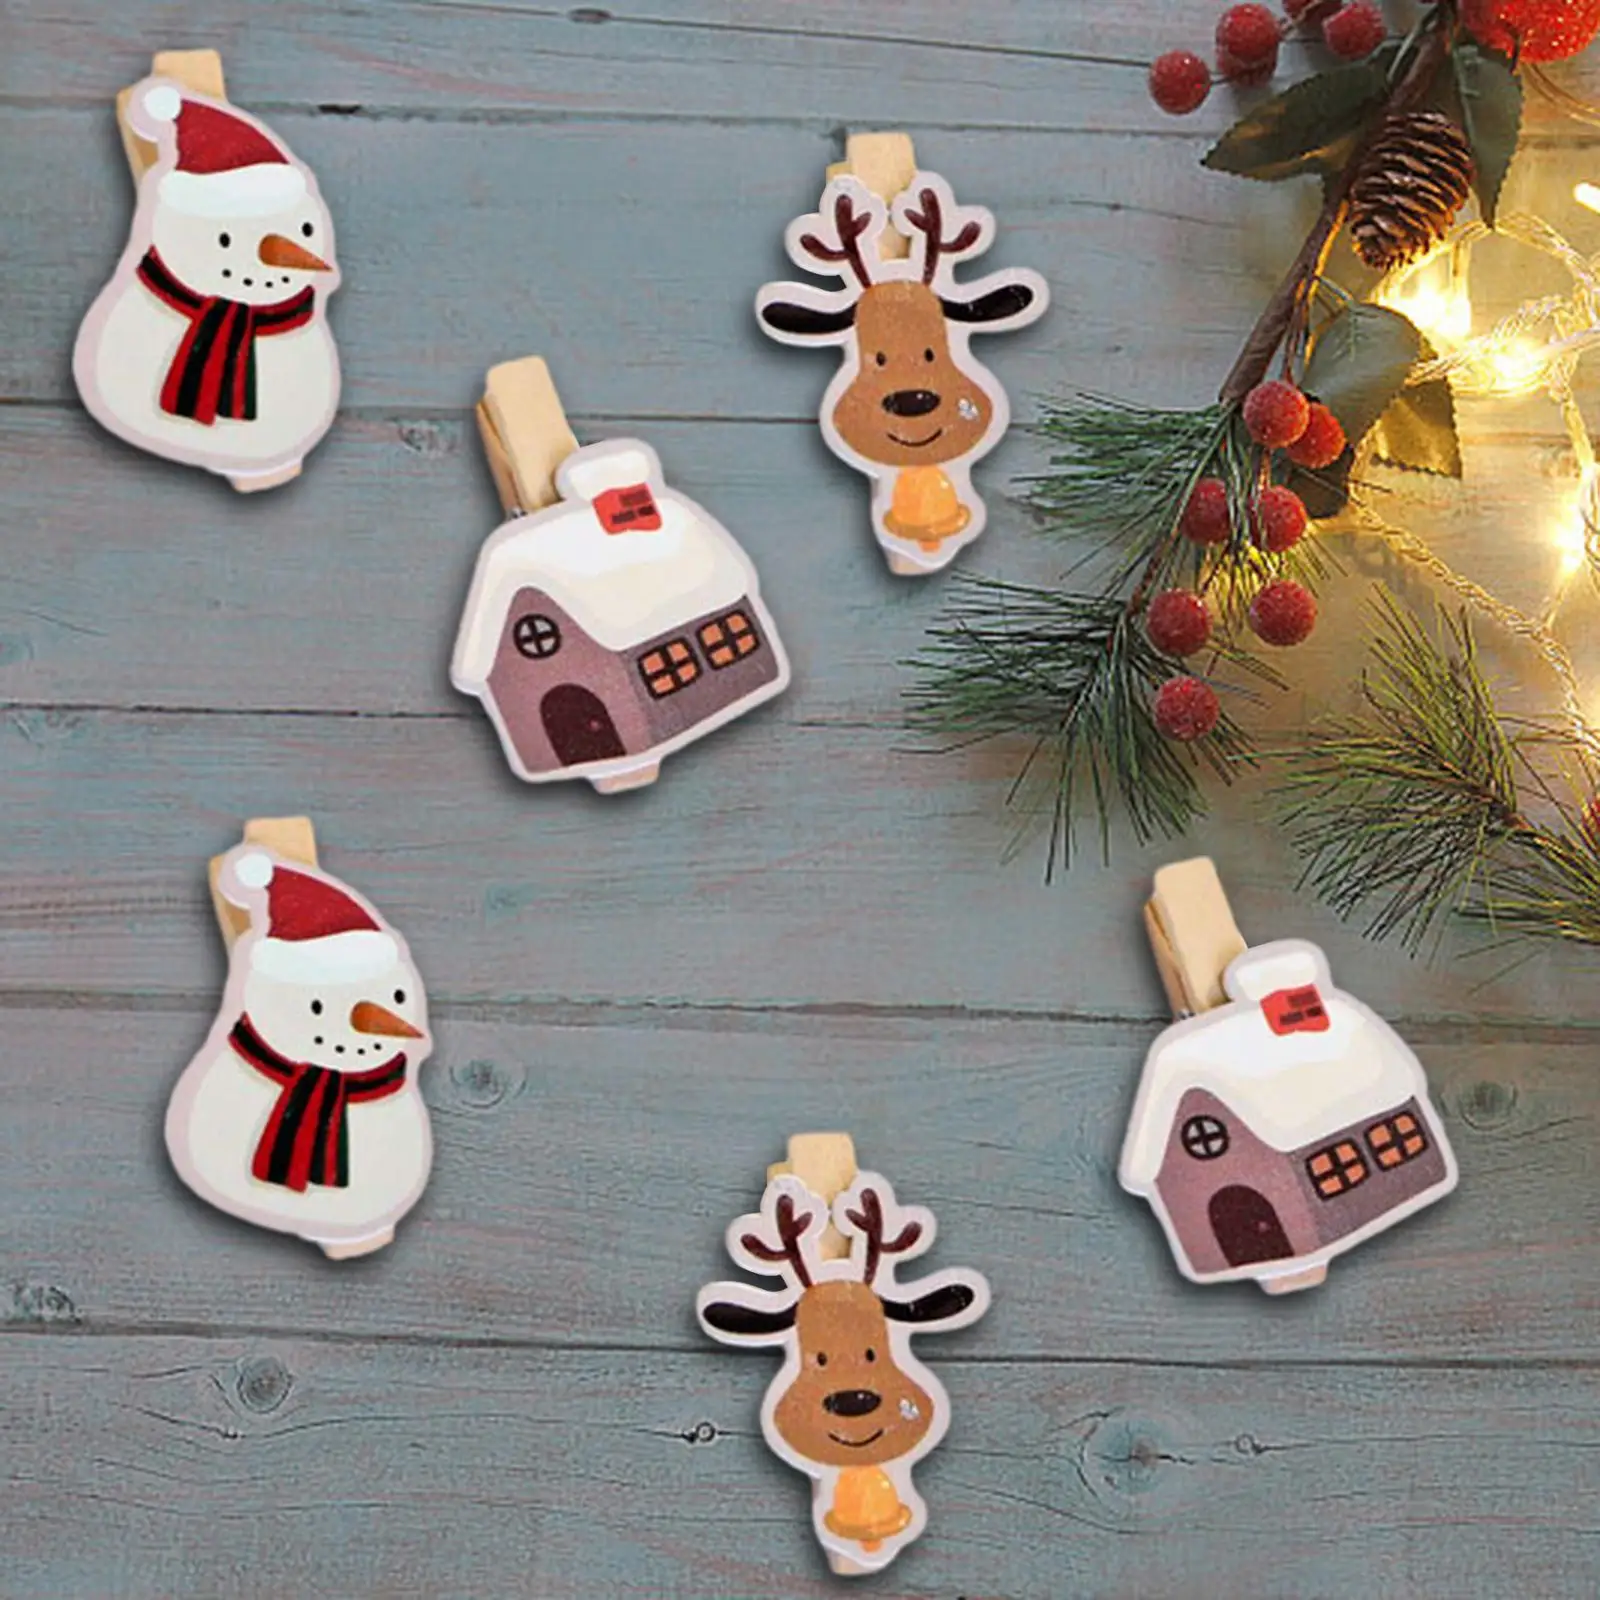 6 Pieces Christmas Wooden Clips Pictures Note Clips Cute Small Clothespins